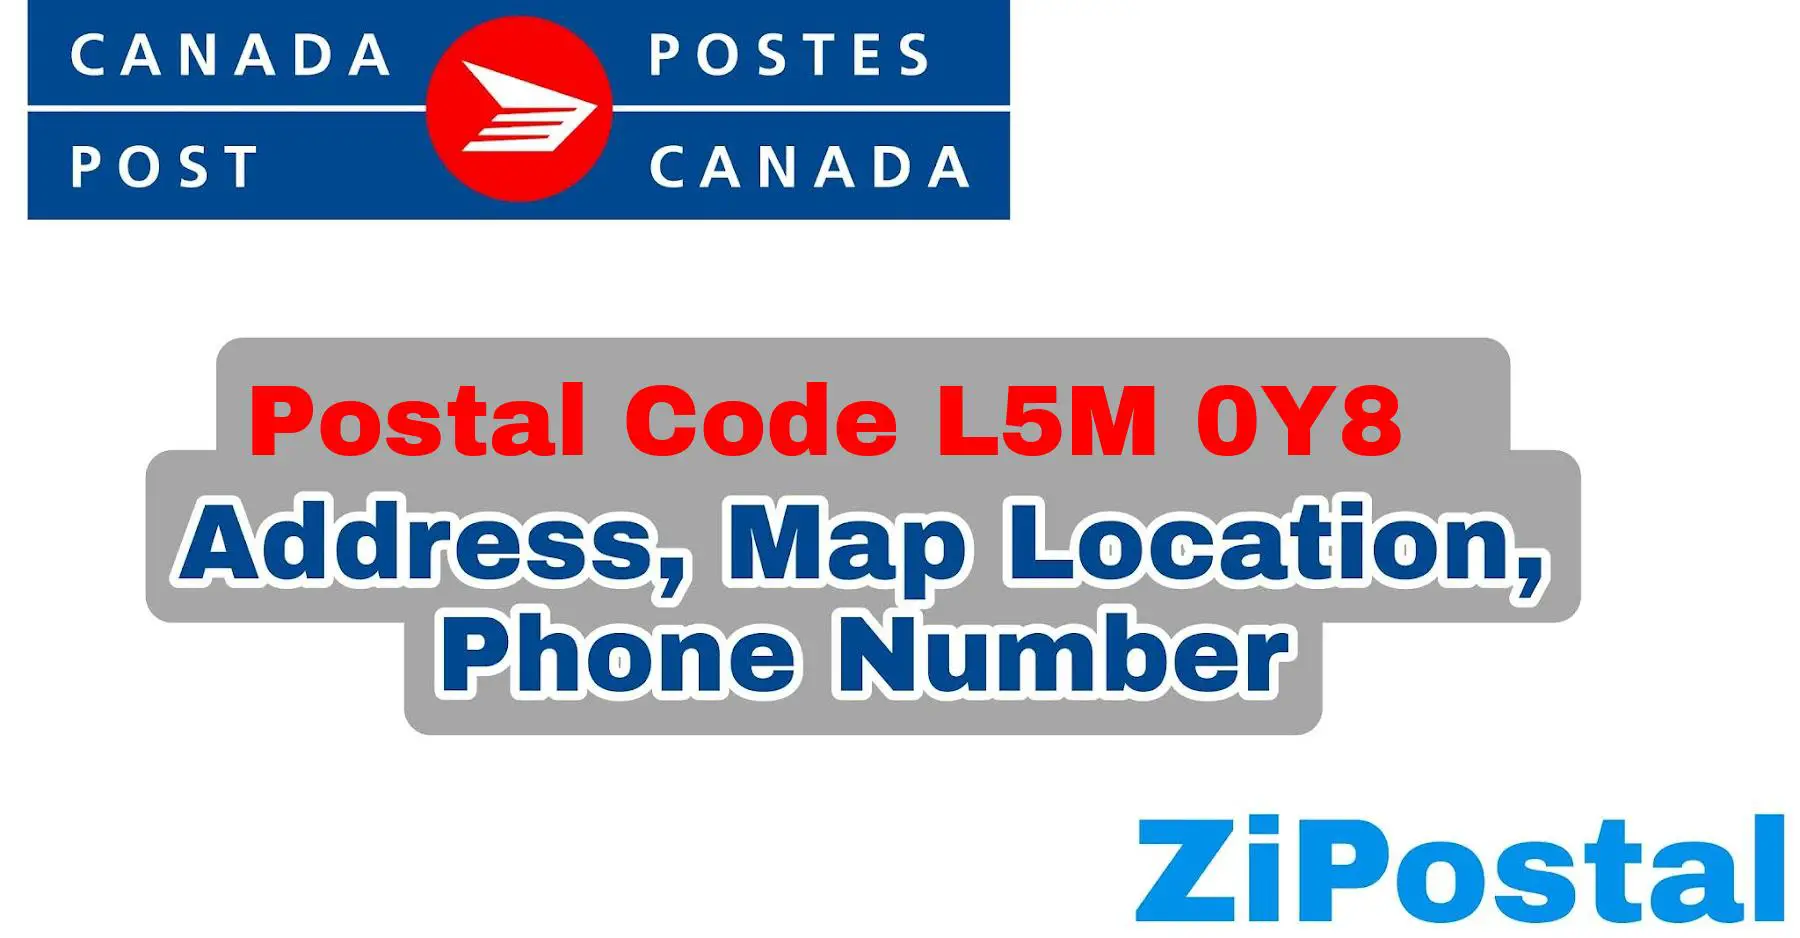 Postal Code L5M 0Y8 Address Map Location and Phone Number